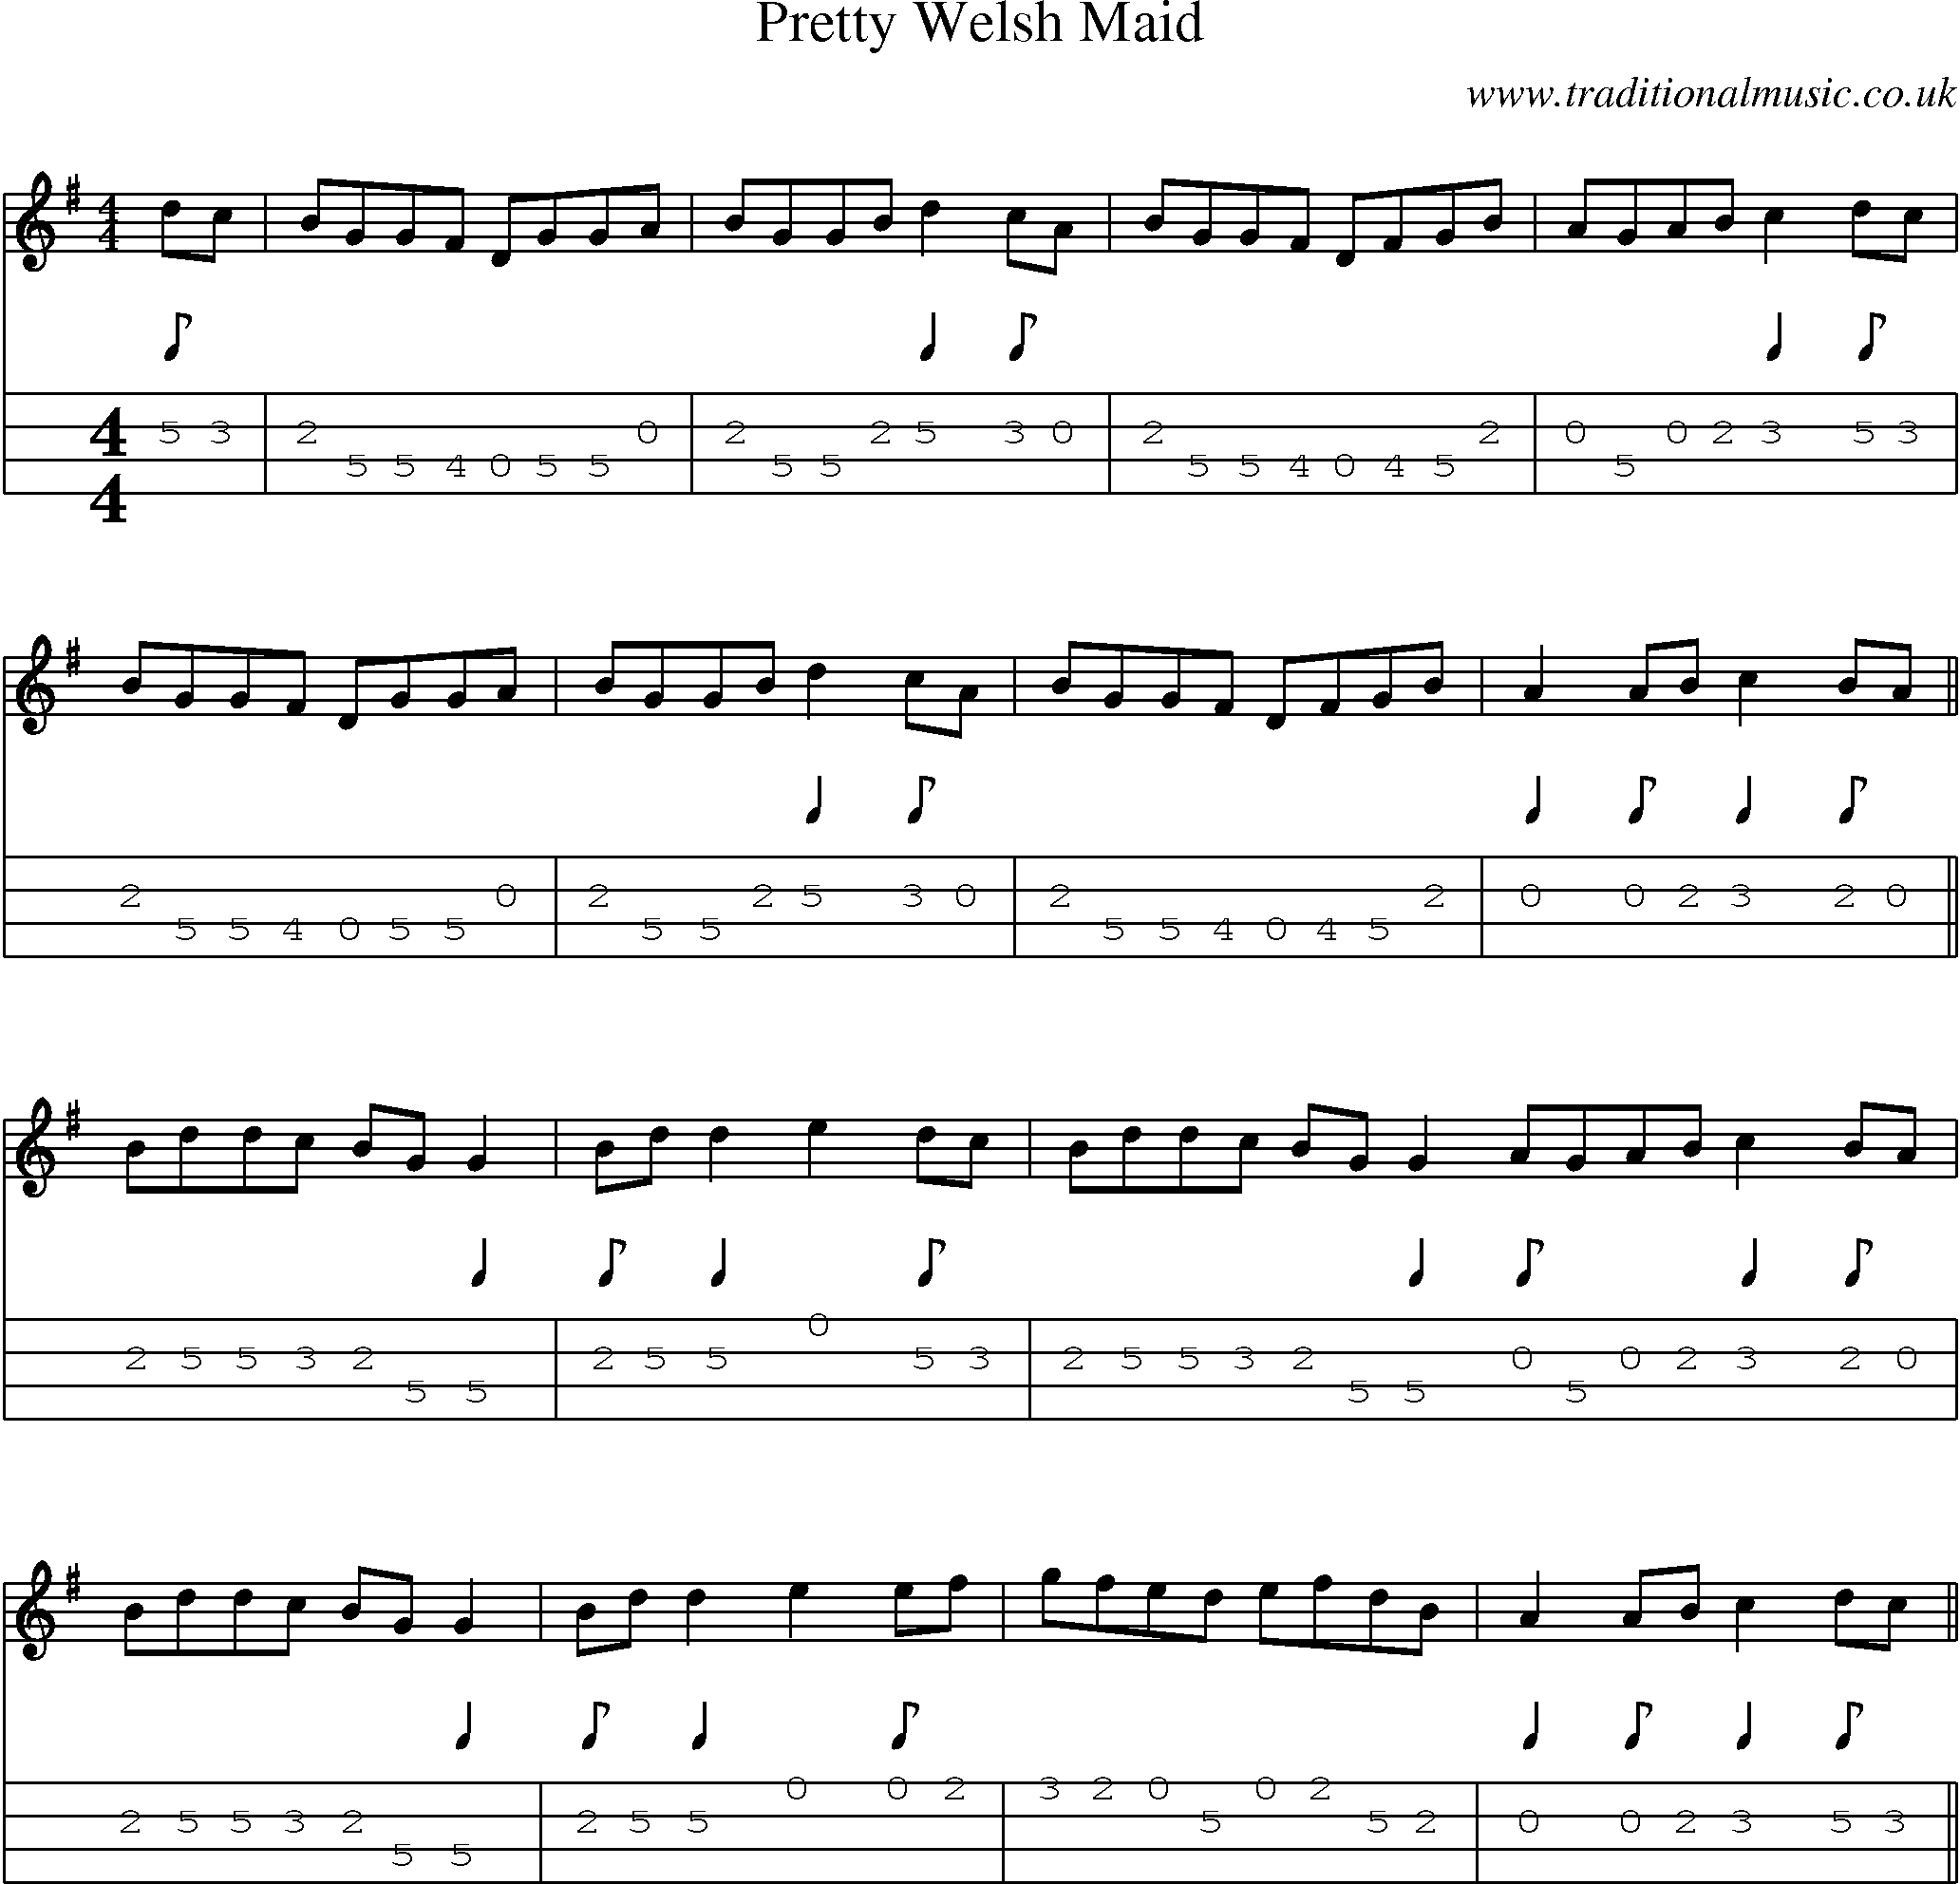 Music Score and Mandolin Tabs for Pretty Welsh Maid